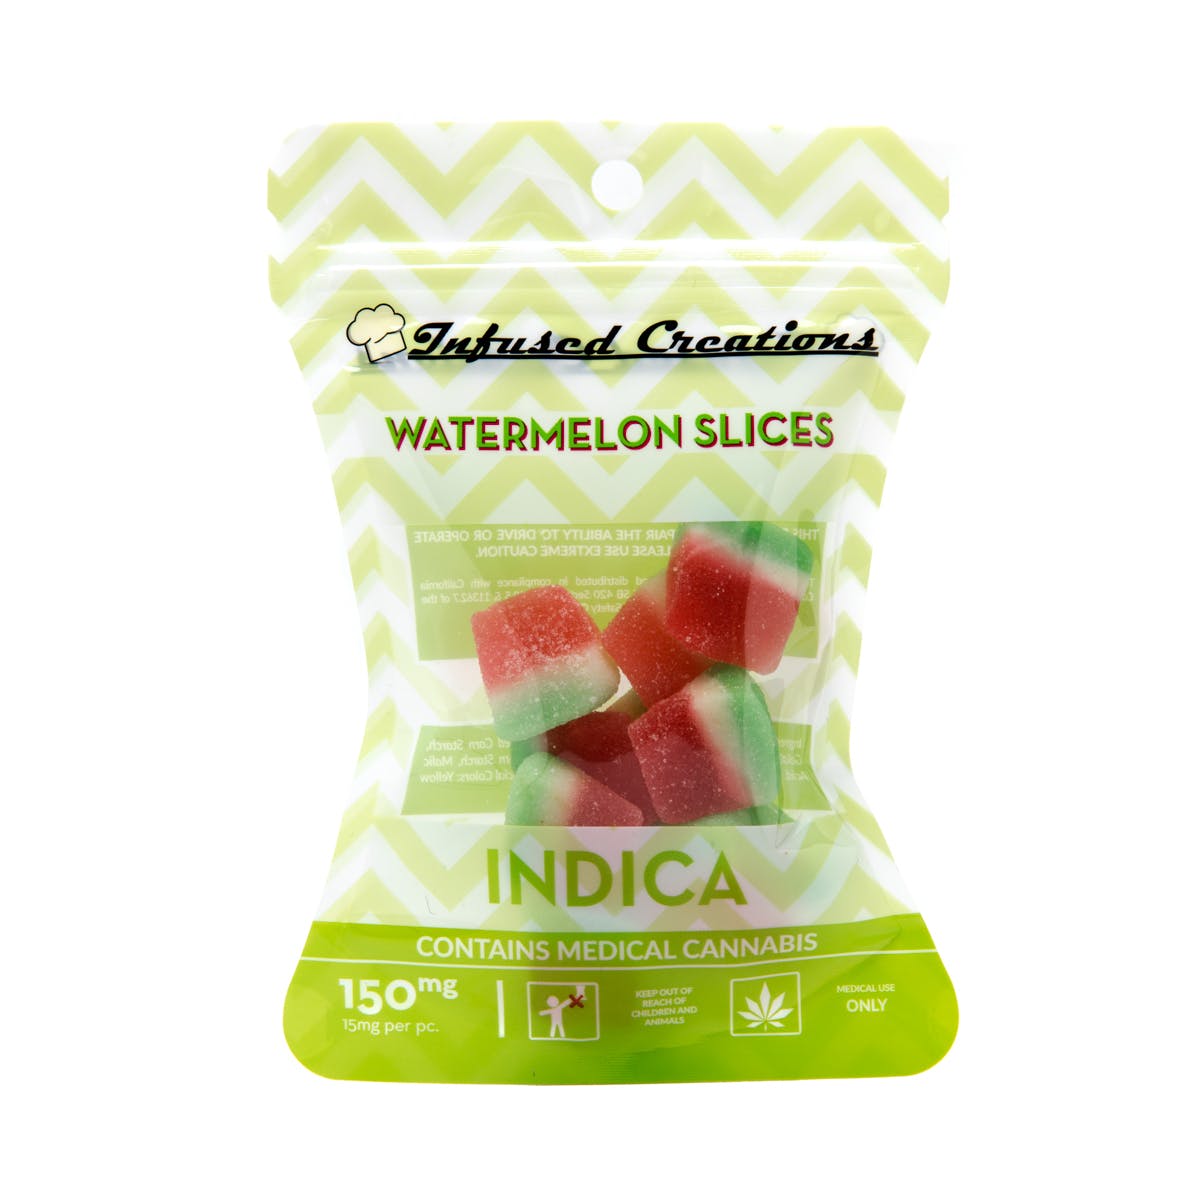 Watermelon Slices Indica, 150mg